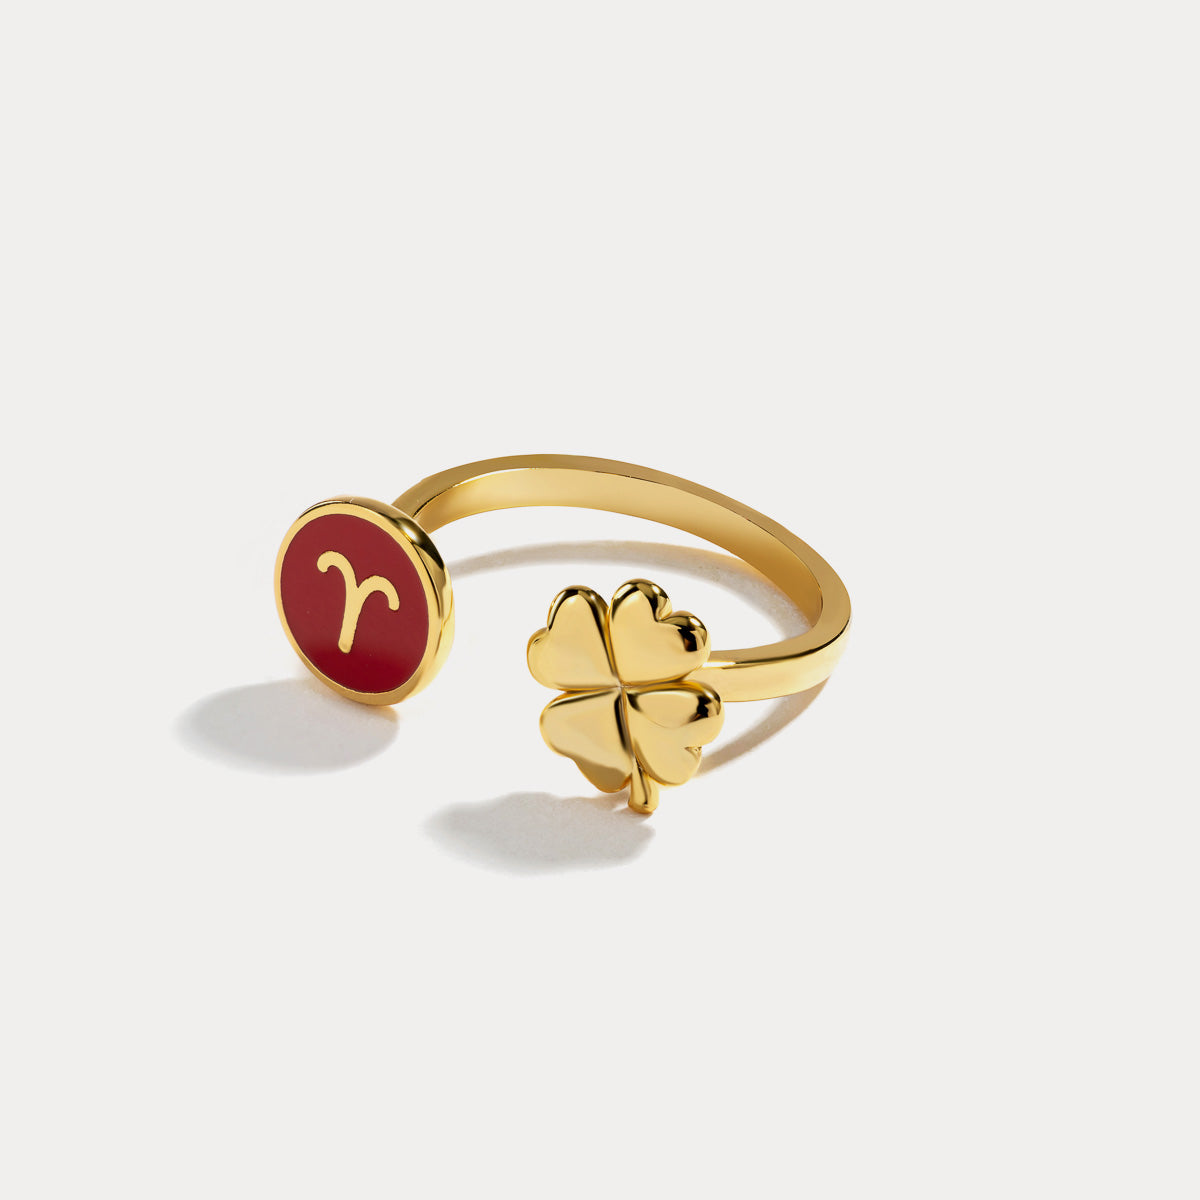 Aries astrological sign ring